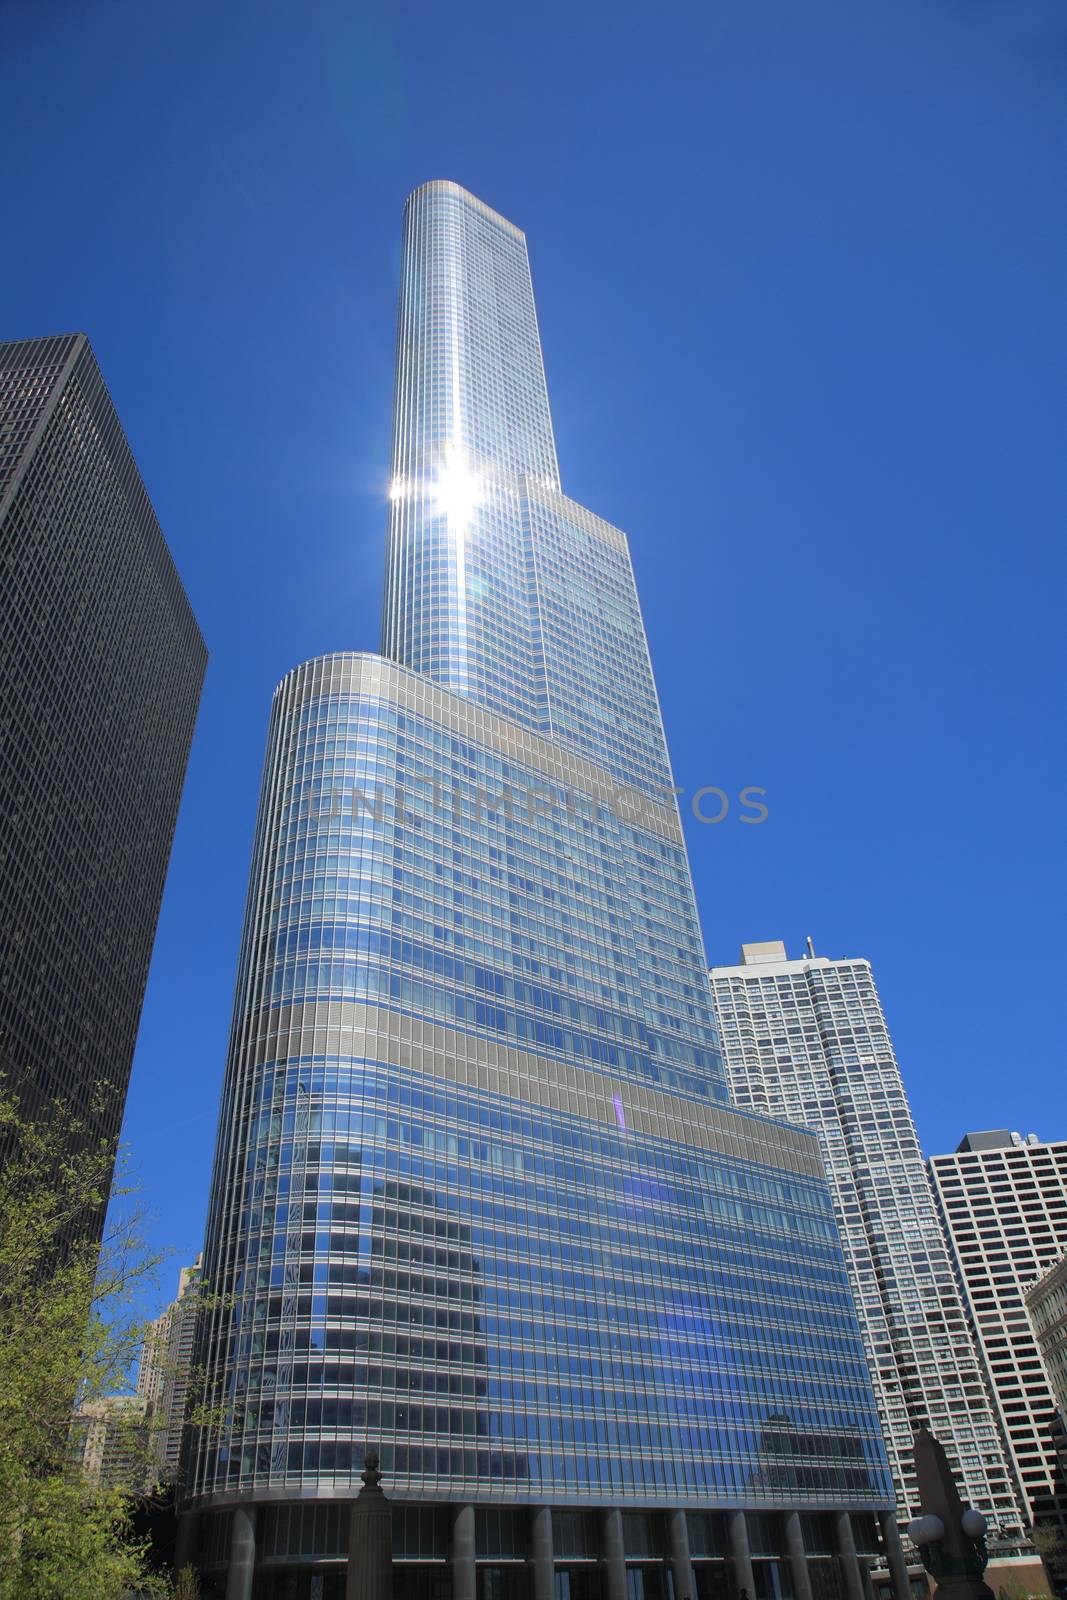 Trump International Hotel and Tower - Chicago by Ffooter